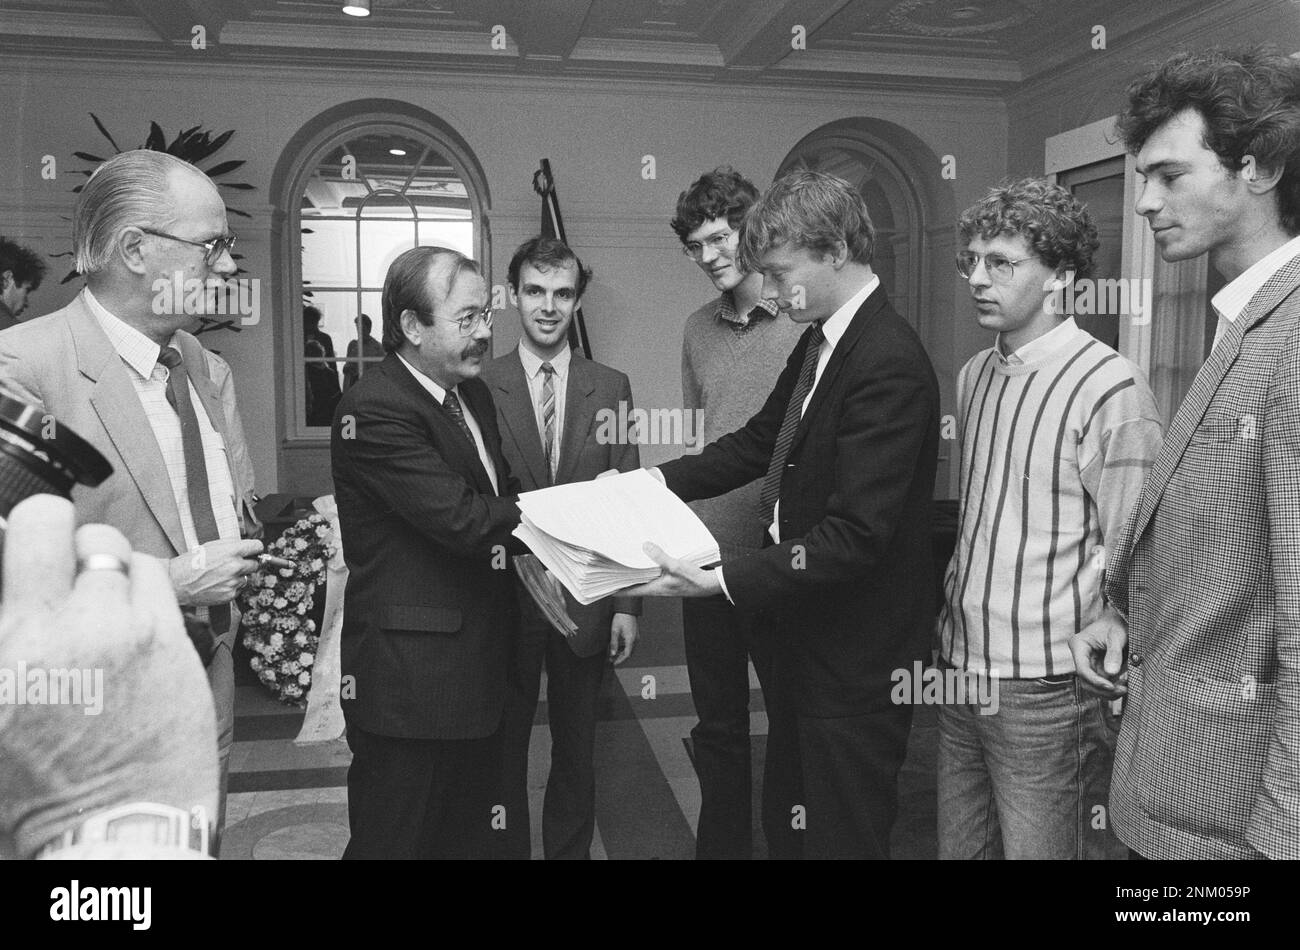 Students offer signatures against Star Wars (U.S. nuclear shield) to chairman of the parliamentary committee Relus ter Beek ca. 1985 Stock Photo